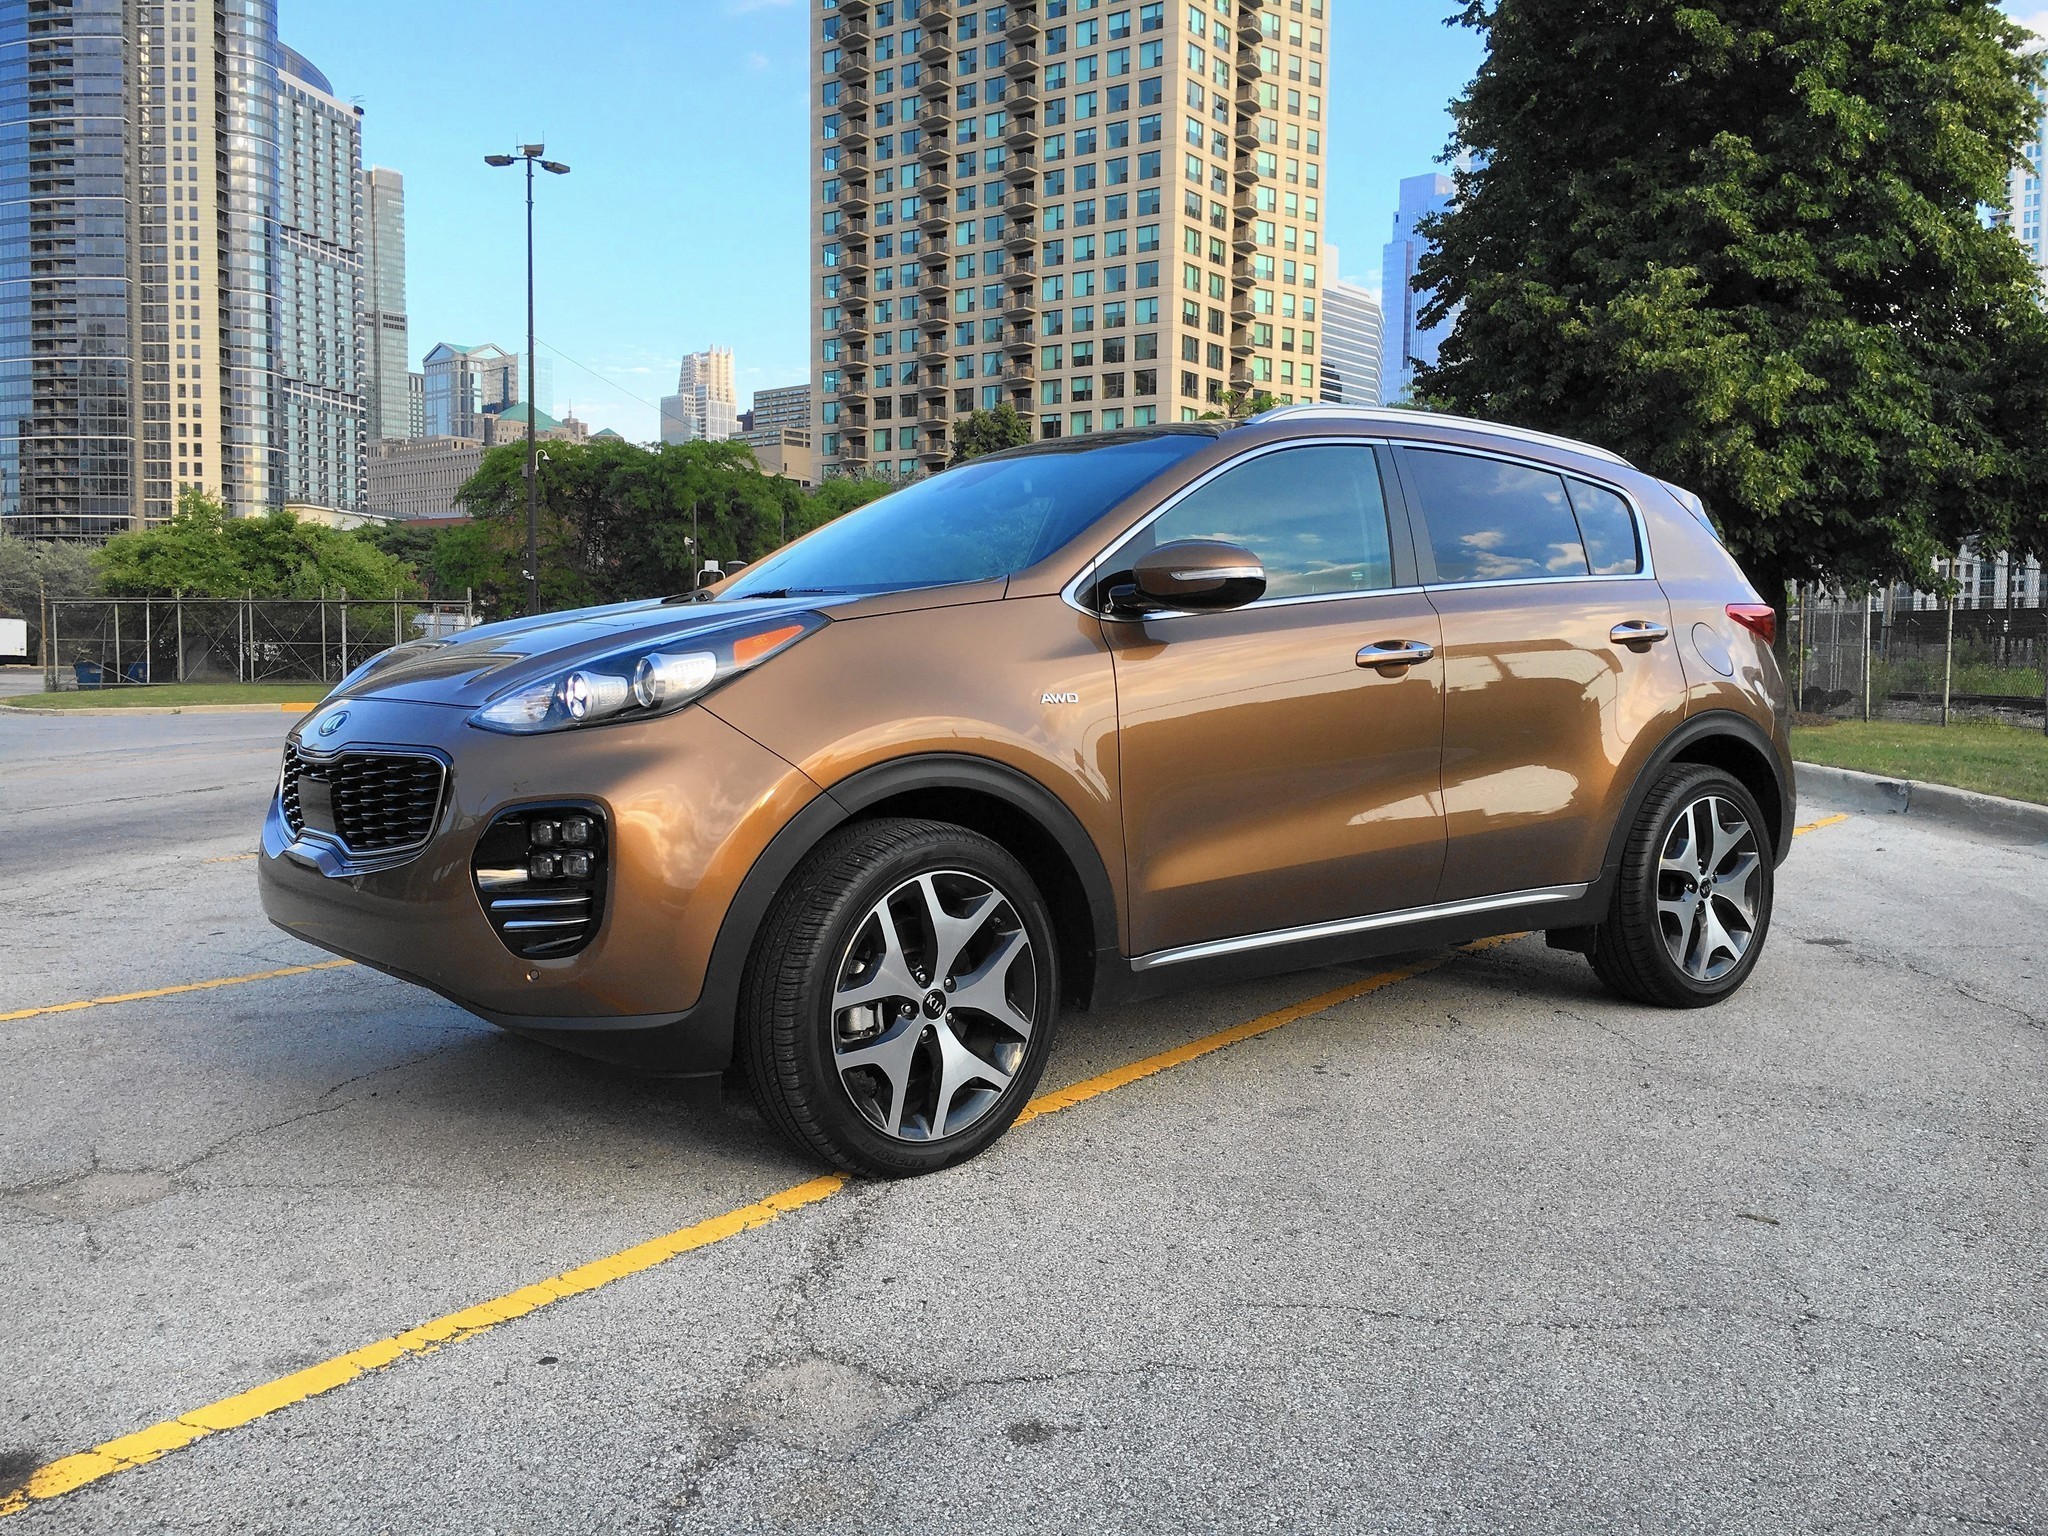 2017 Kia Sportage Contends In Crowded Class Of Compact